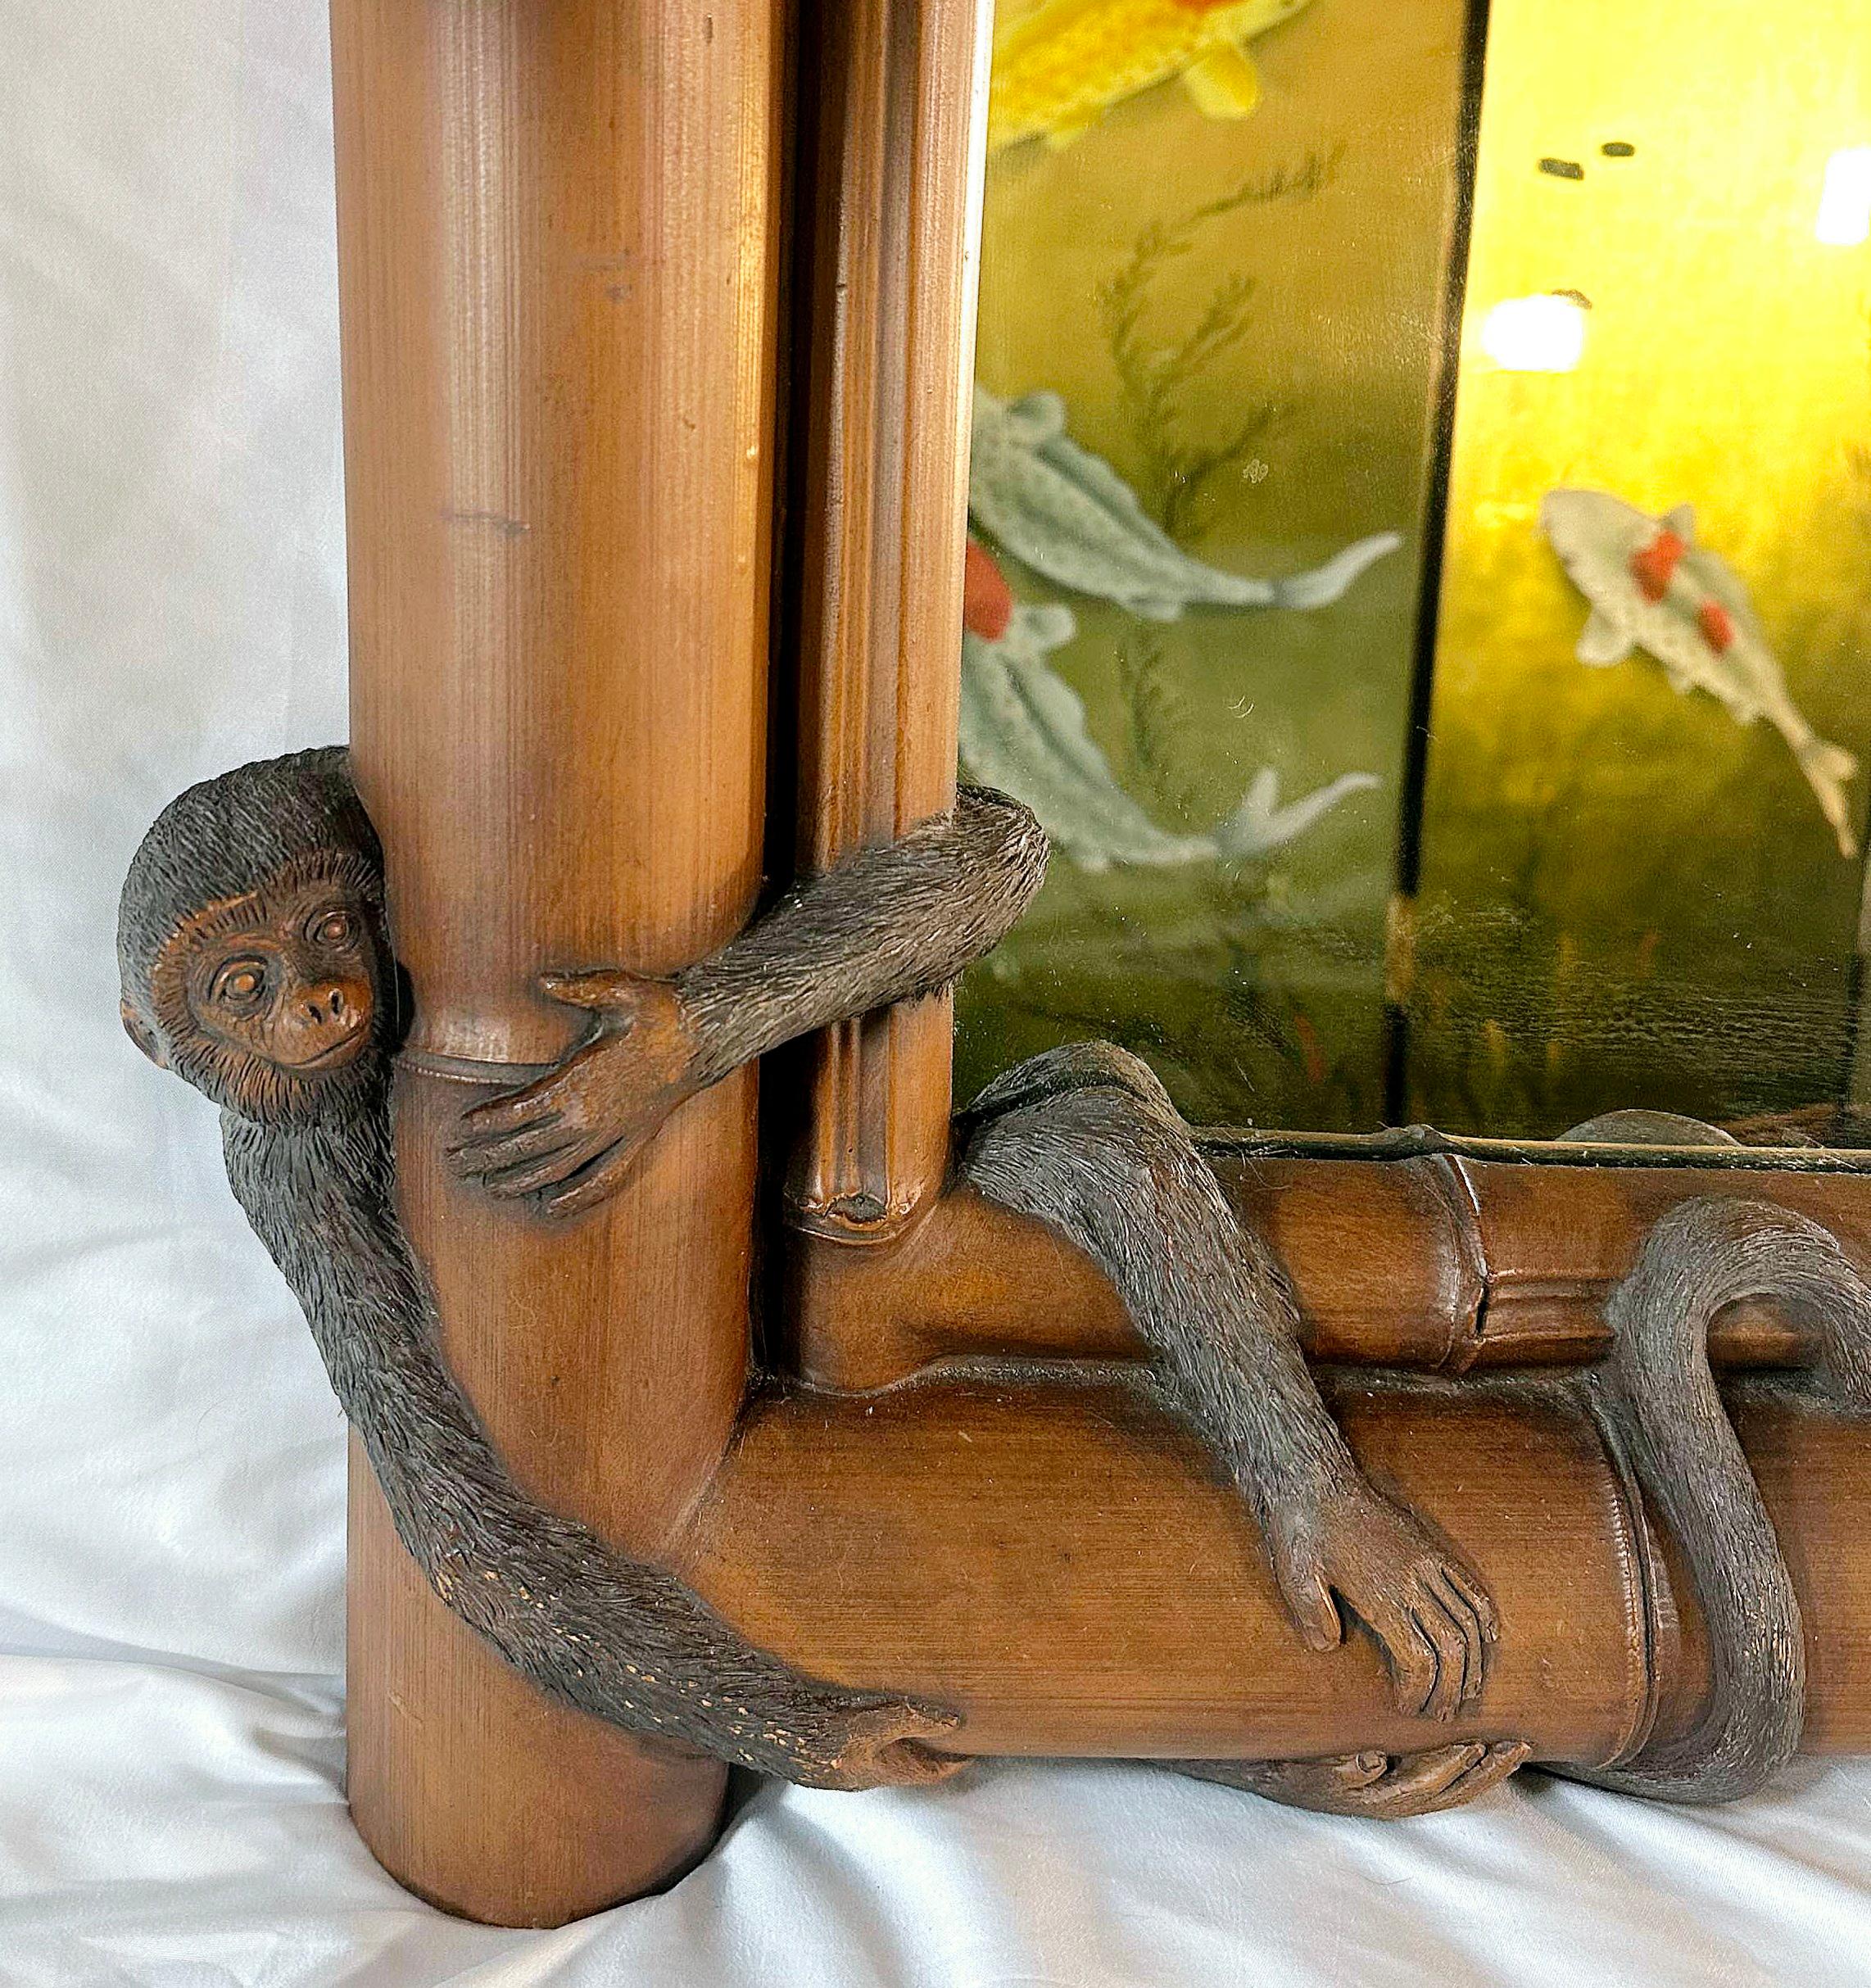 Reminiscent of Earnest Hemingway, Maitland Smith and Tommy Bahama.
Late 20th Century Faux Bamboo Mirror flanked with four monkeys. 
Made of either a composite or resin material. 
The monkeys are painted and the bamboo is accented with color. 
Would